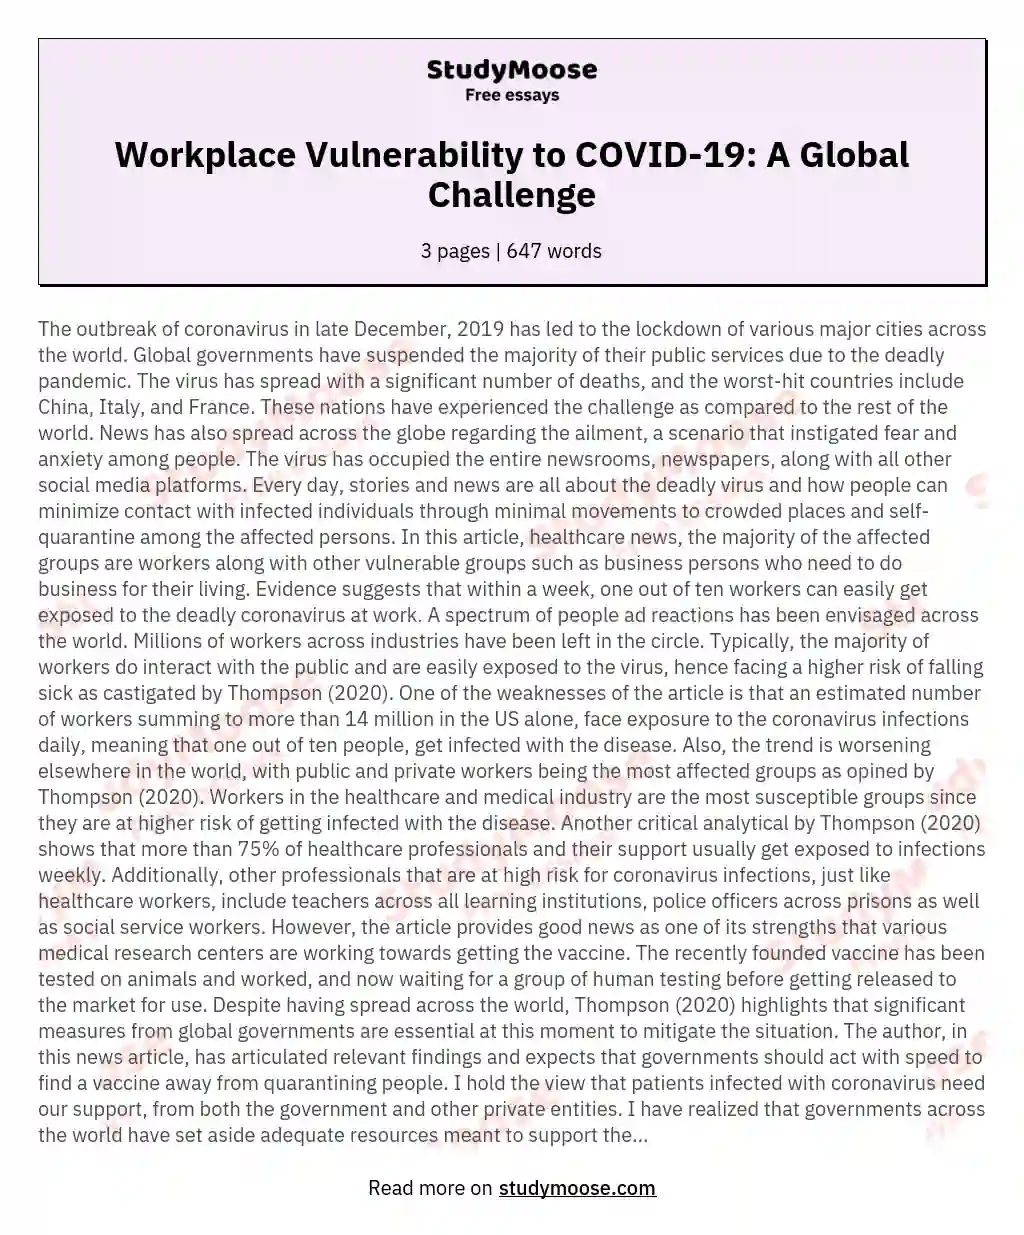 Workplace Vulnerability to COVID-19: A Global Challenge essay